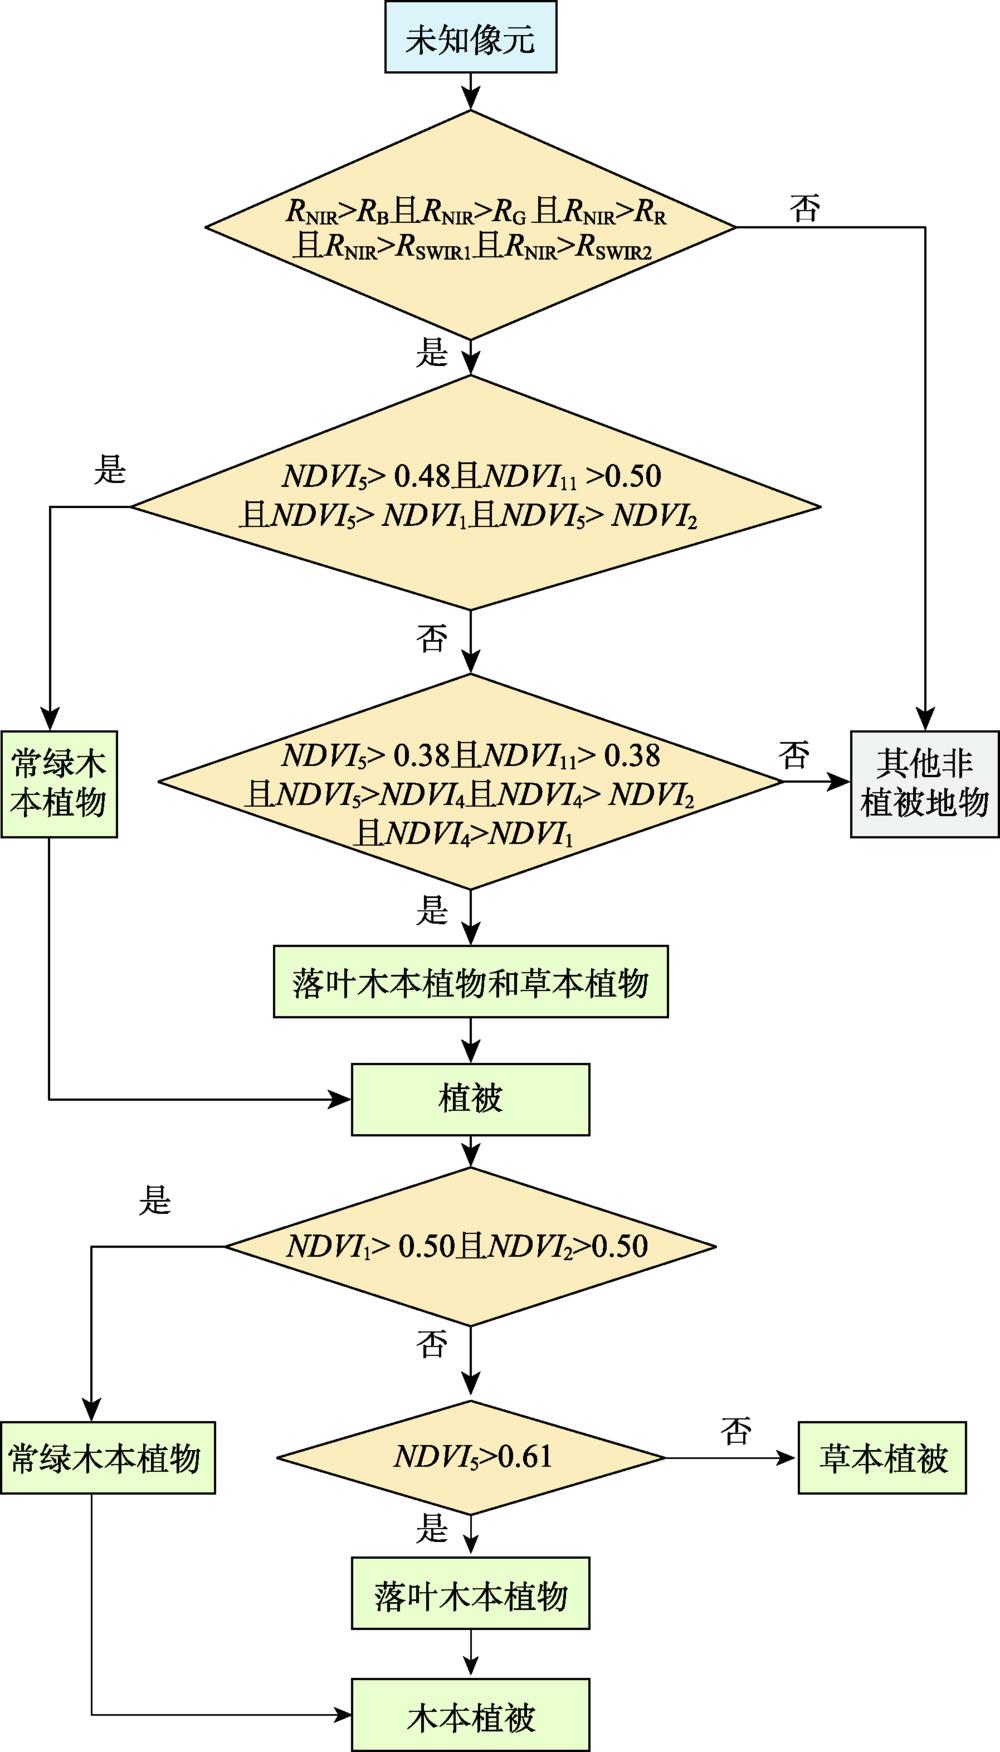 Flowchart of vegetation extraction in lakeside of Dianchi Lake